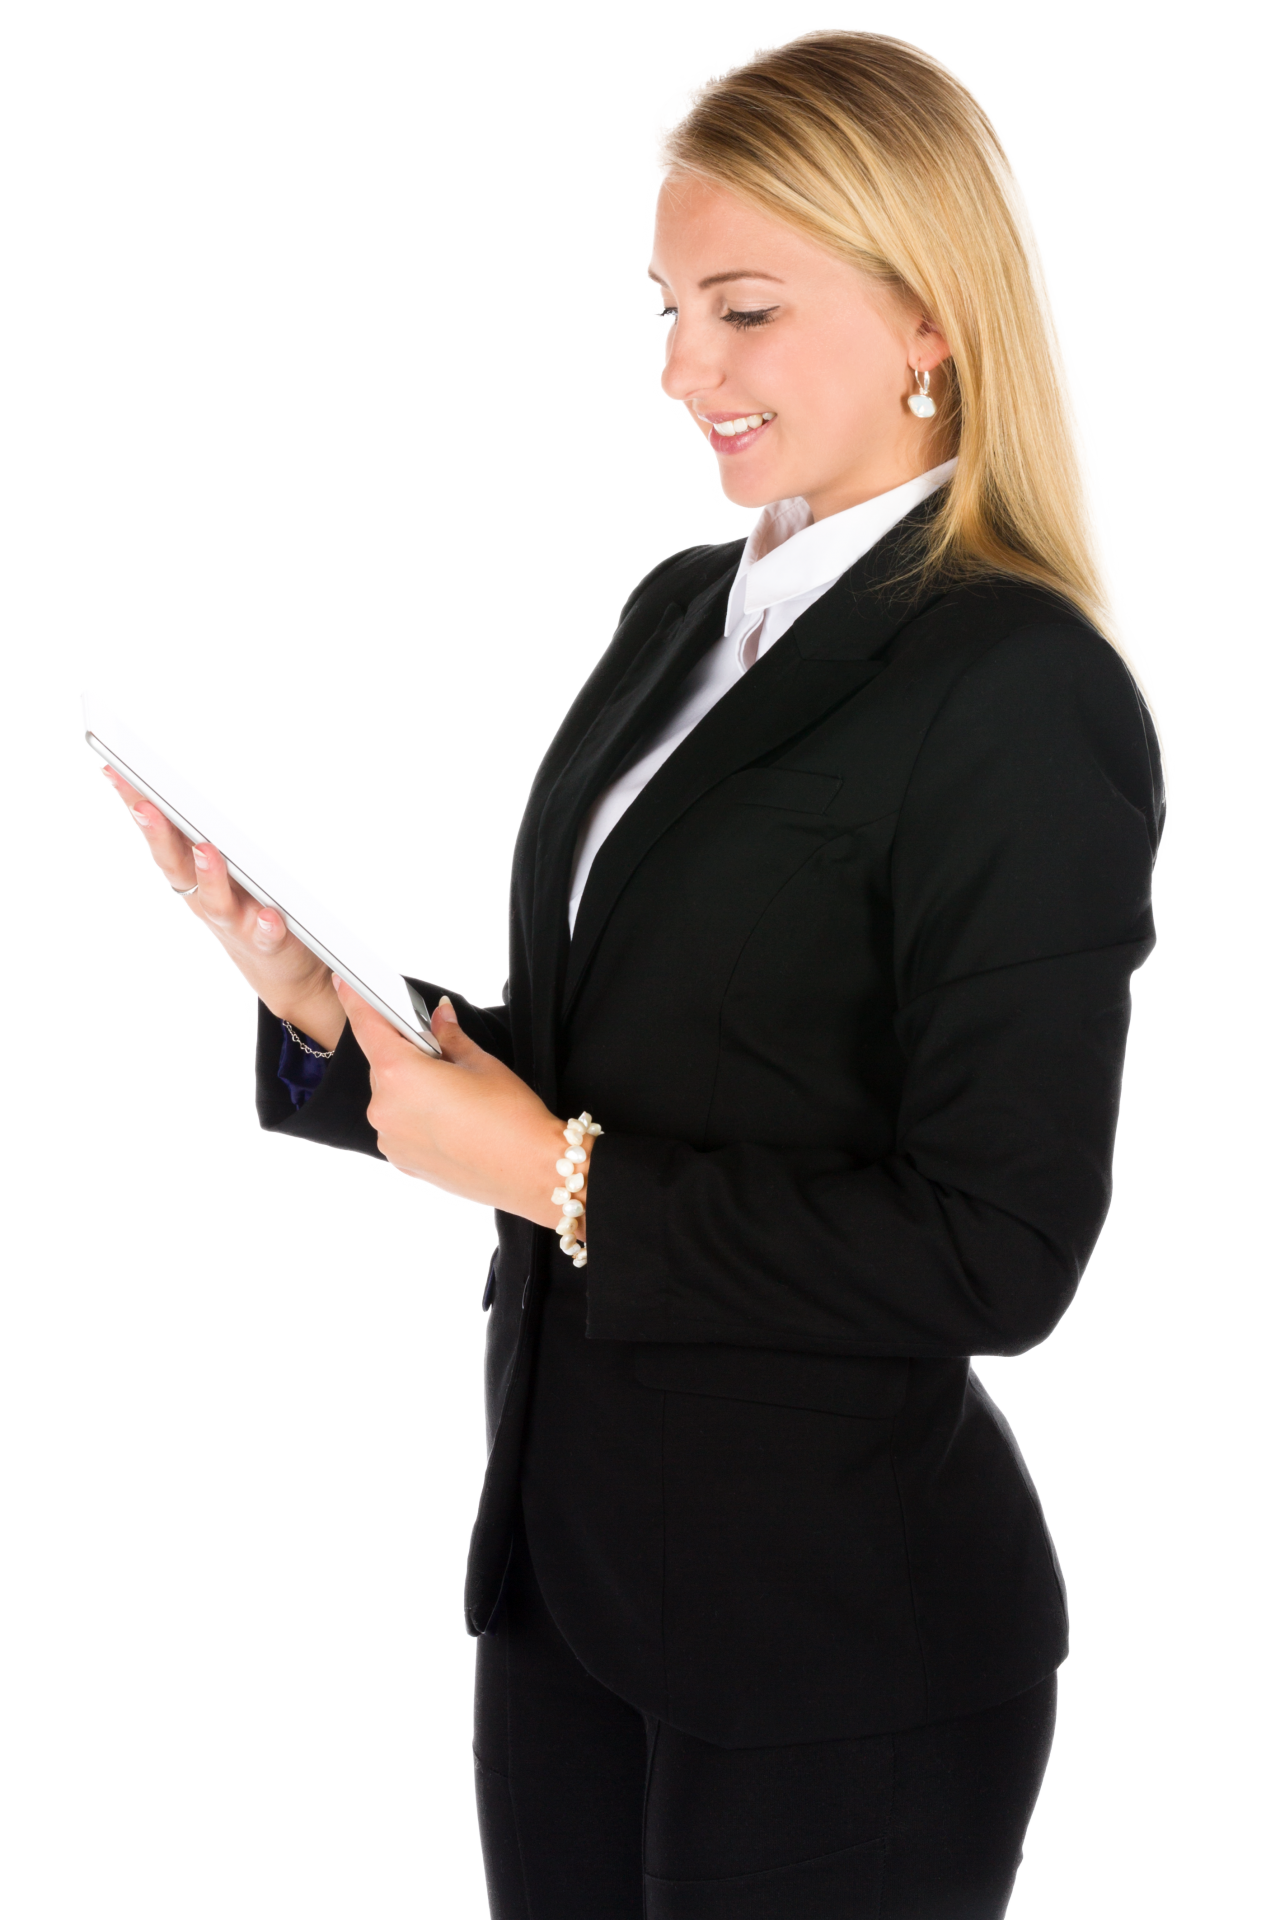 https://www.publicdomainpictures.net/pictures/290000/velka/business-woman-and-a-tablet-1548843930SDF.png